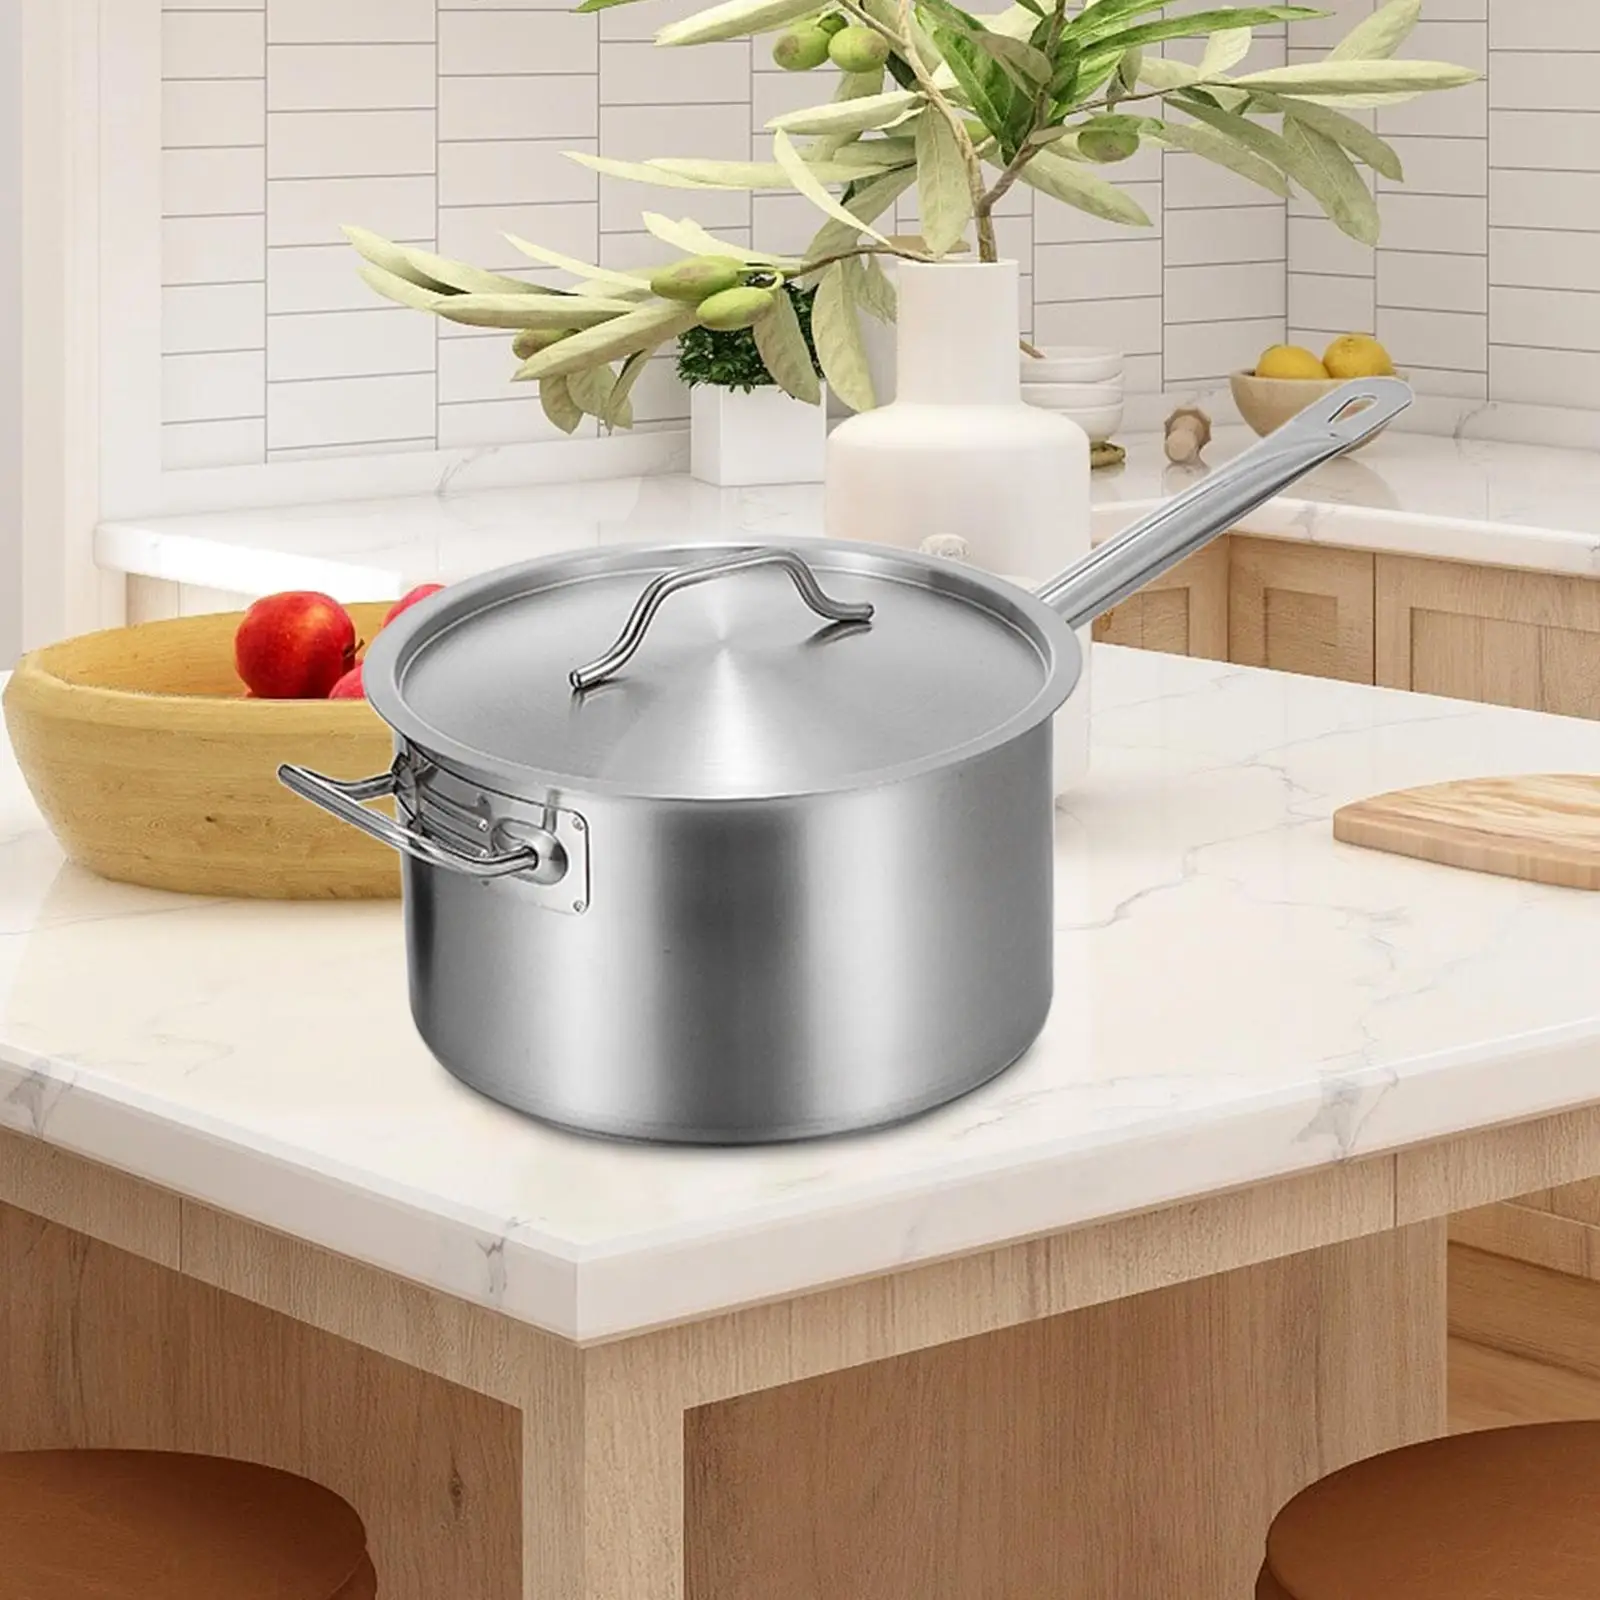 Saucepan with Lid Noodles Portable Stainless Steel Cooking Pot Induction Pot for Hotel Restaurants Kitchen Restaurant Teahouse